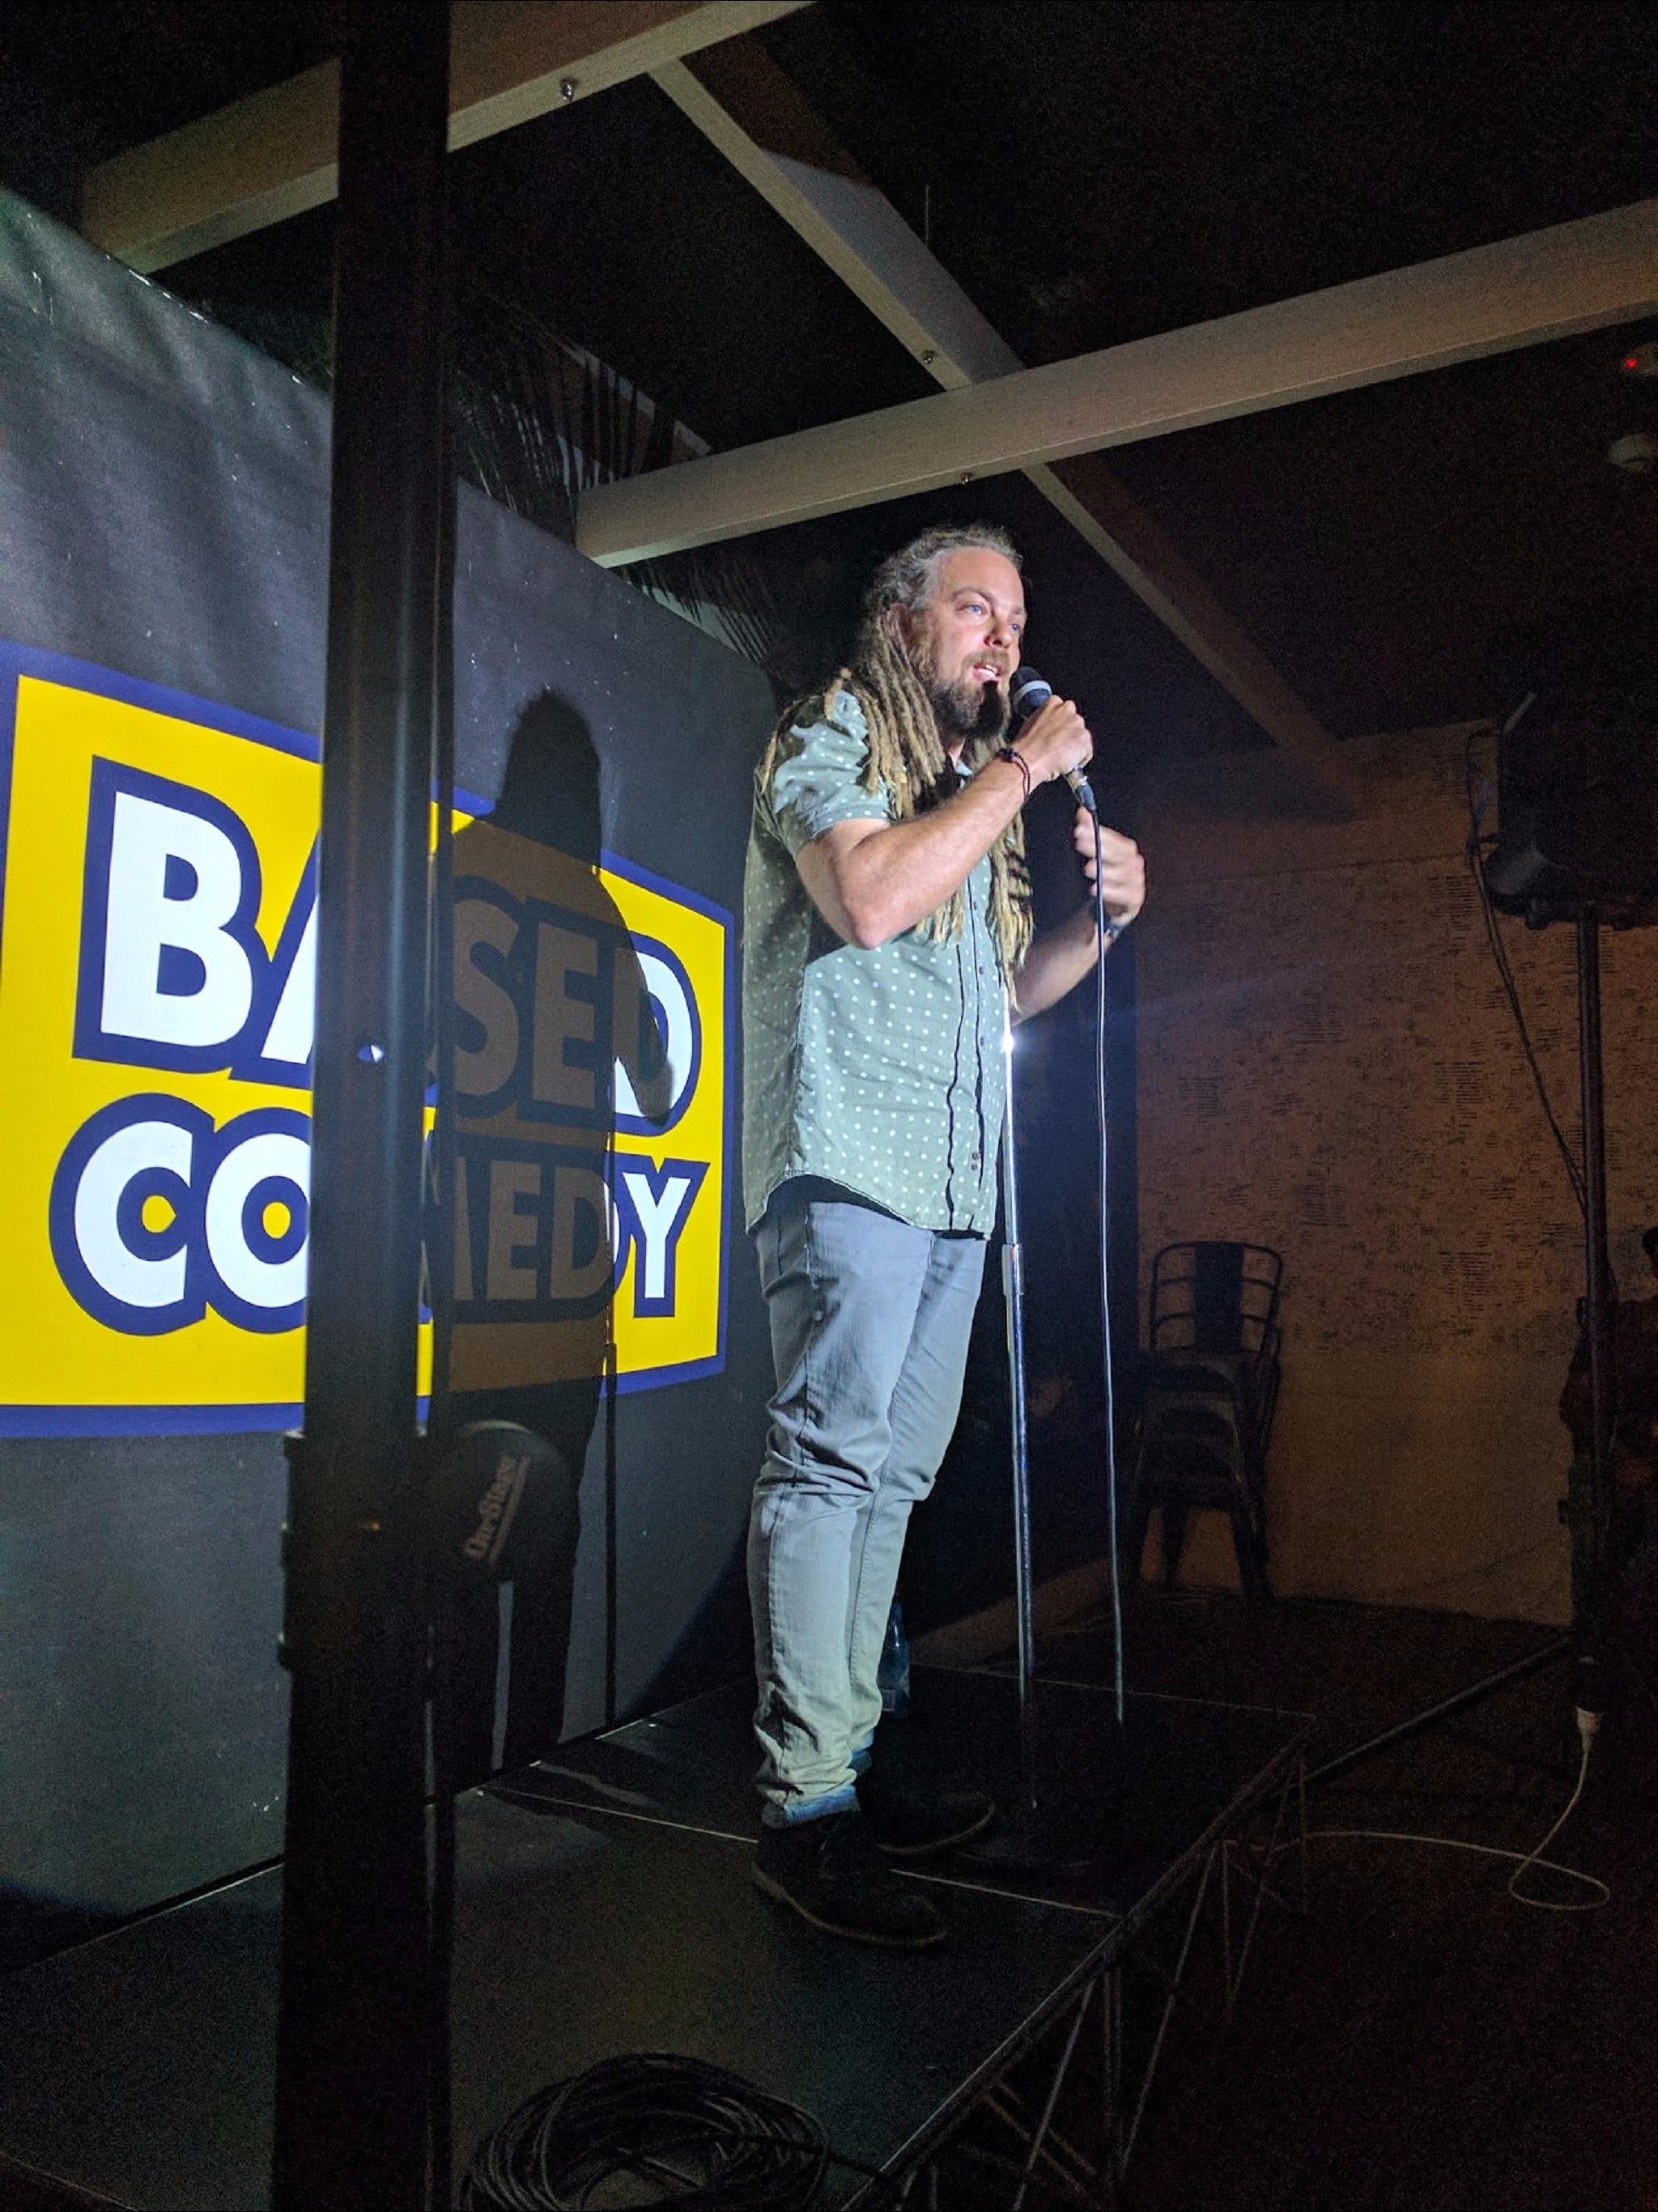 Based Comedy at The Palm Beach Hotel - Great Ocean Road Tourism